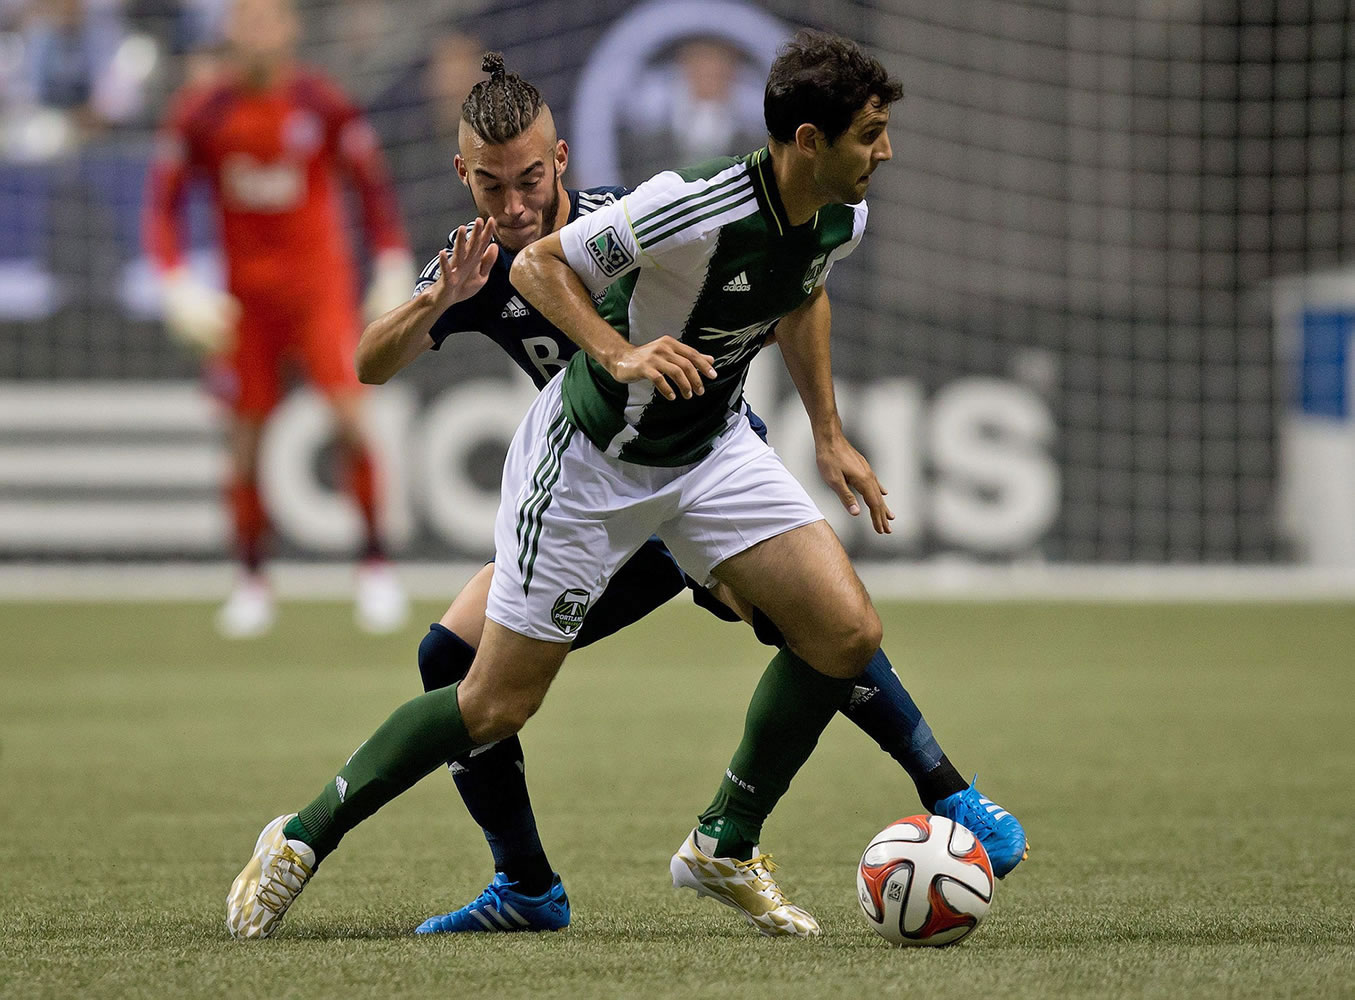 Portland Timbers' Diego Valeri, front, of Argentina, controls the ball as Vancouver Whitecaps' Russell Teibert defends during the first half of an MLS soccer game in Vancouver, British Columbia, on Saturday, Aug. 30, 2014.